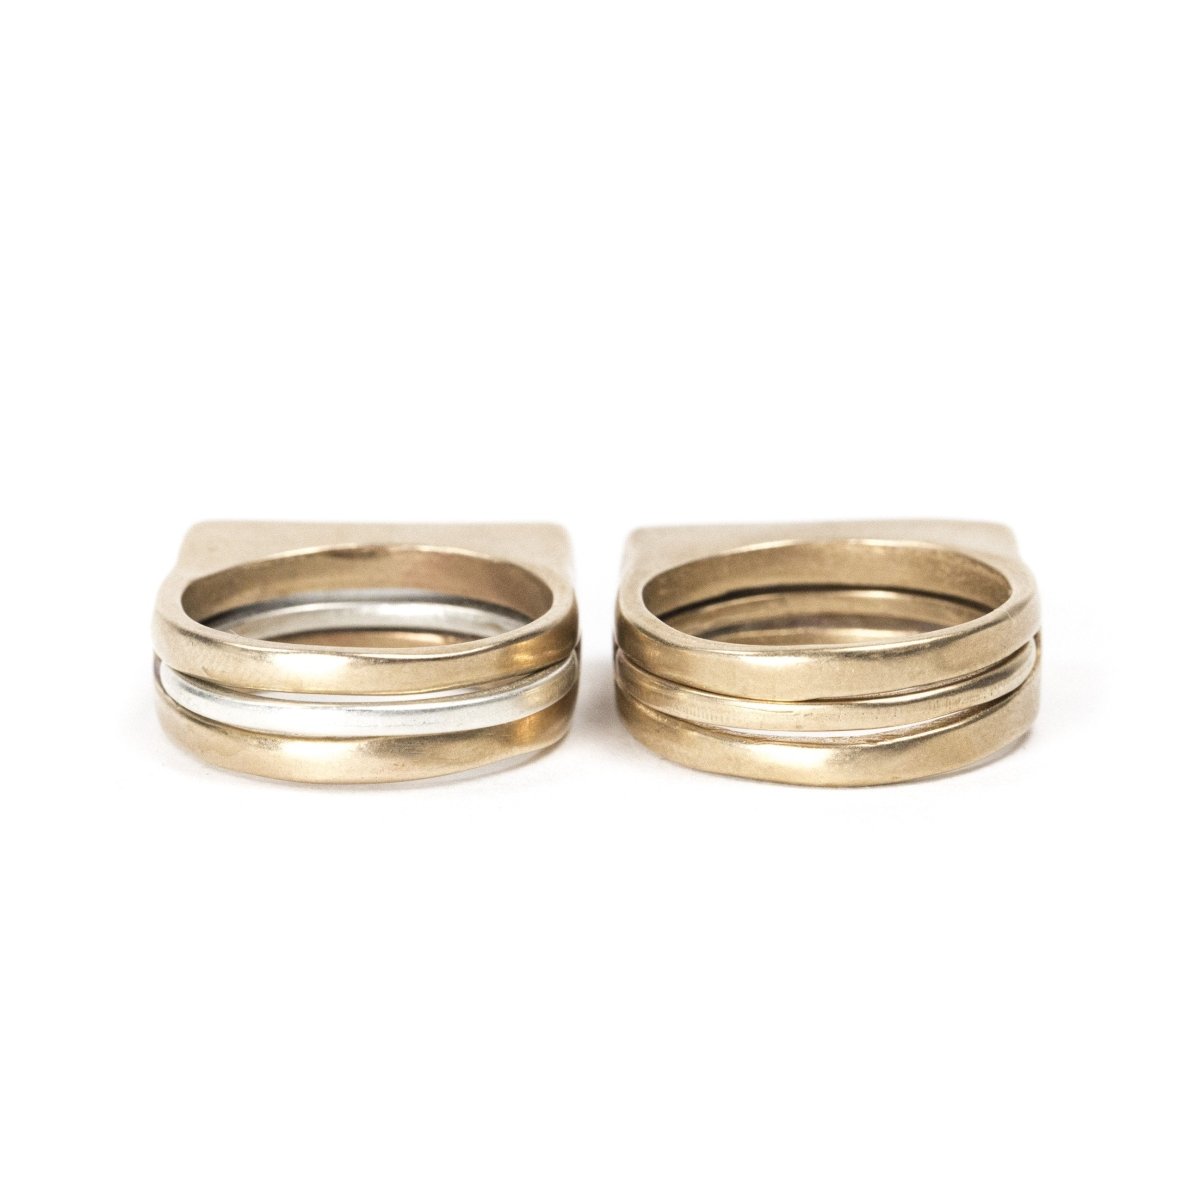 A set of silver and cast bronze Tuyo and Mía rings, and a set of all-bronze Tuyo and Mía rings, pictured side by side. Hand-crafted in Portland, Oregon.